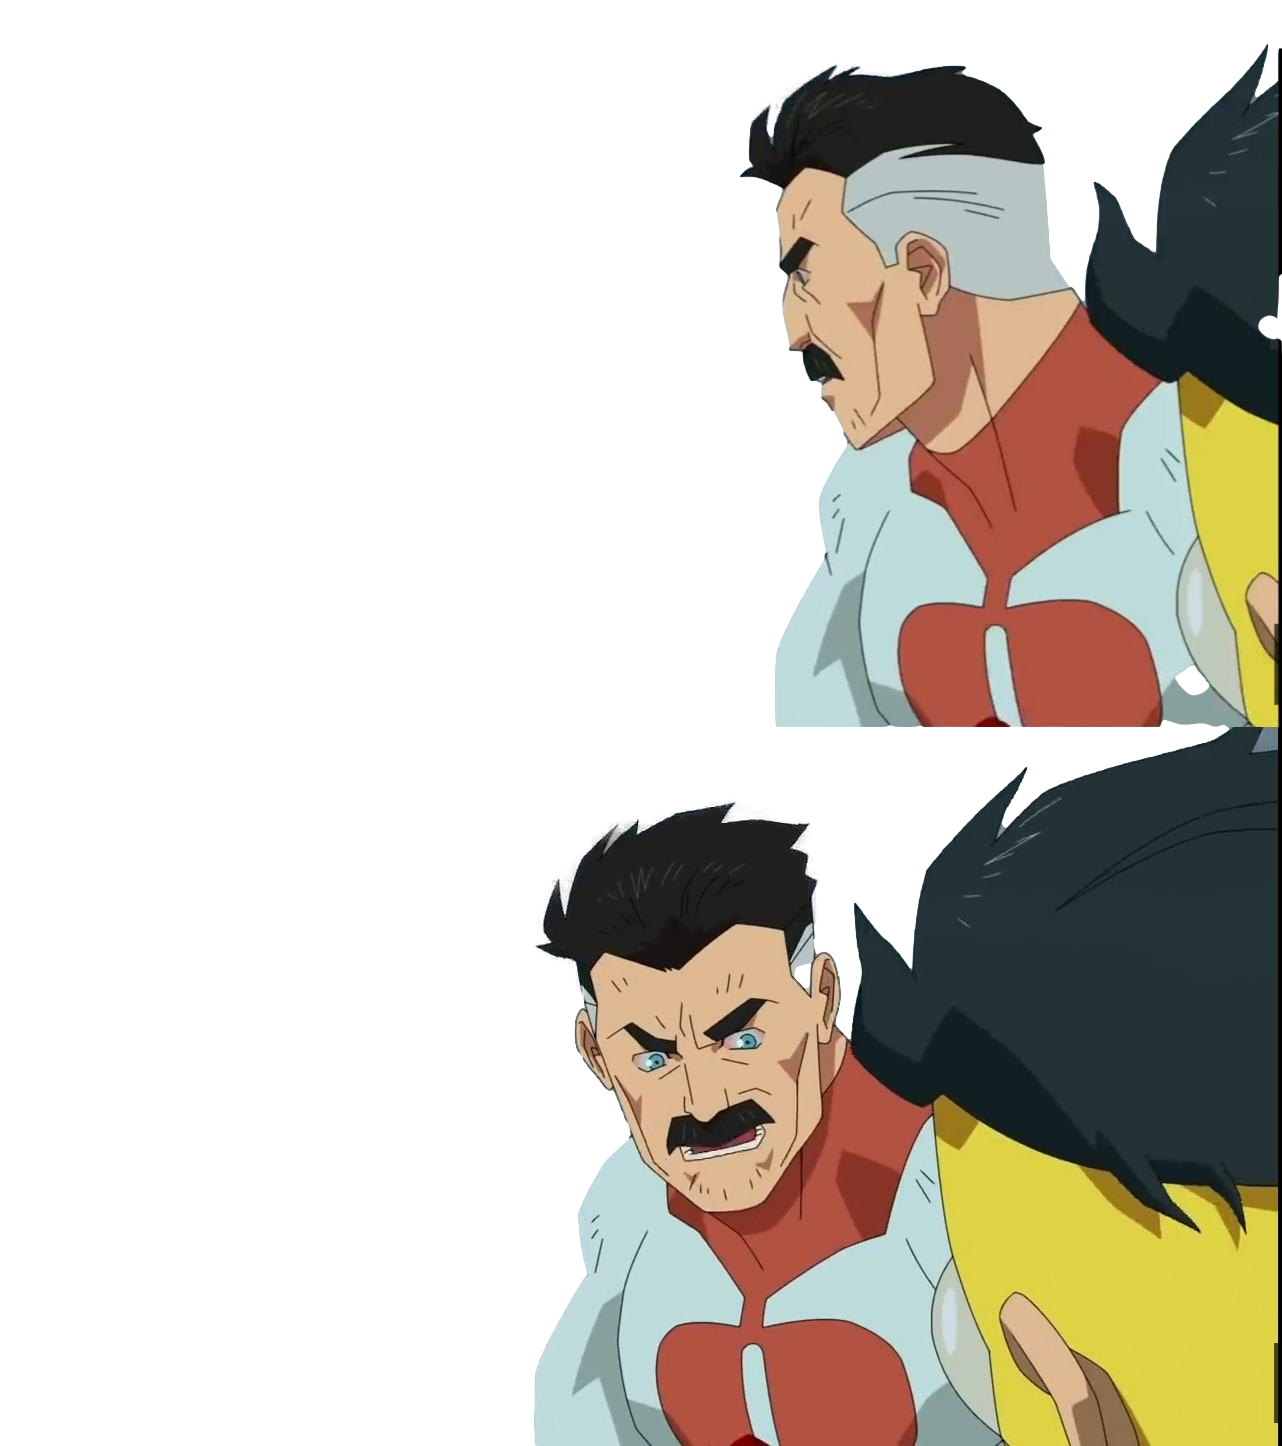 Omni-man / invincible / recognize what they want / template HD + Clear background